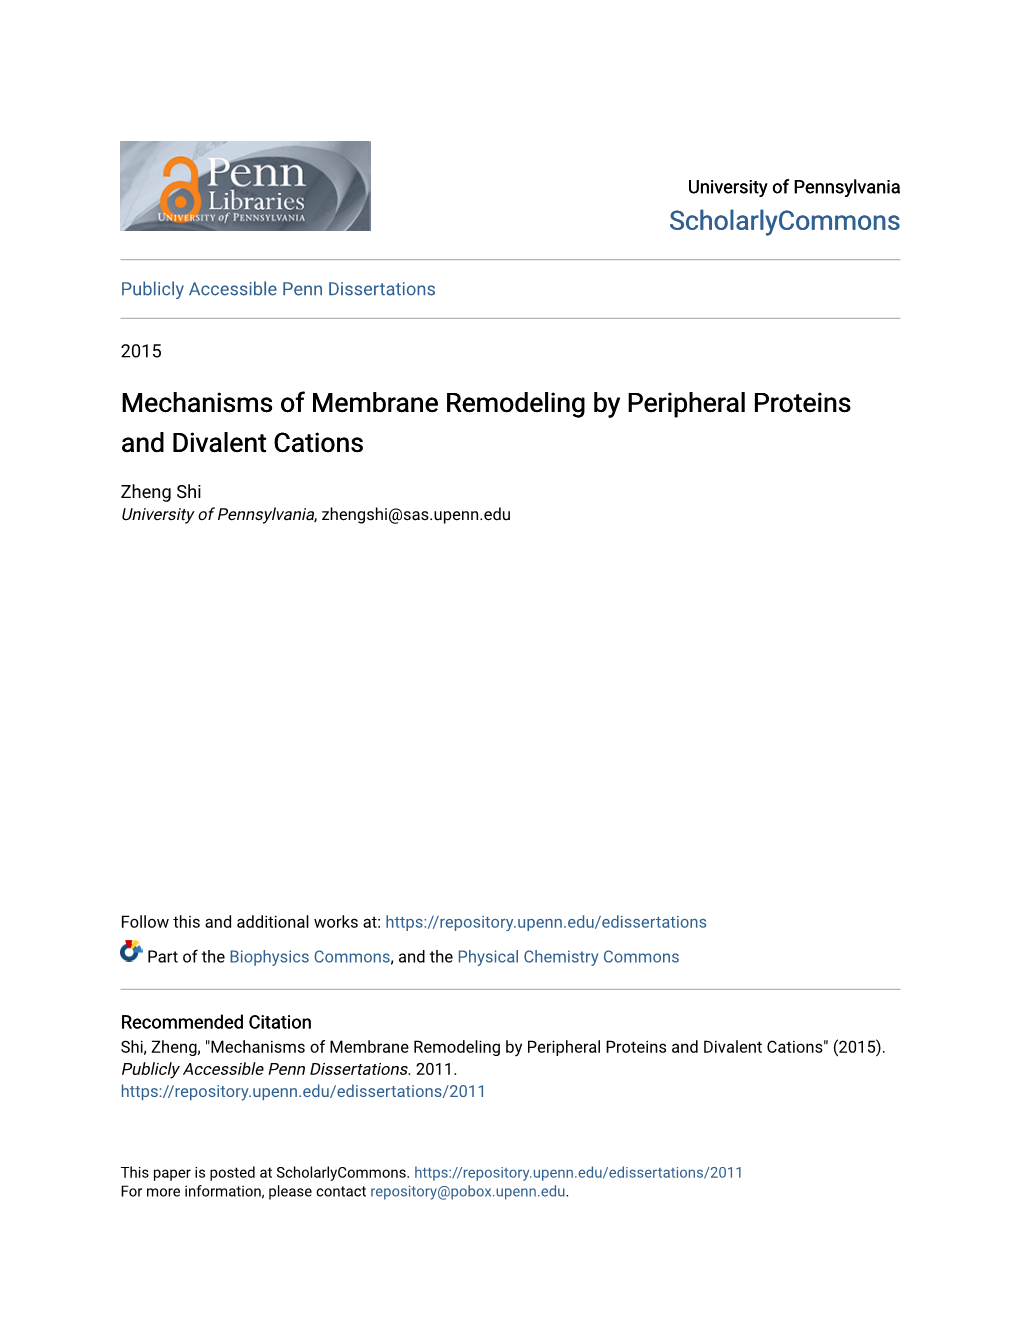 Mechanisms of Membrane Remodeling by Peripheral Proteins and Divalent Cations